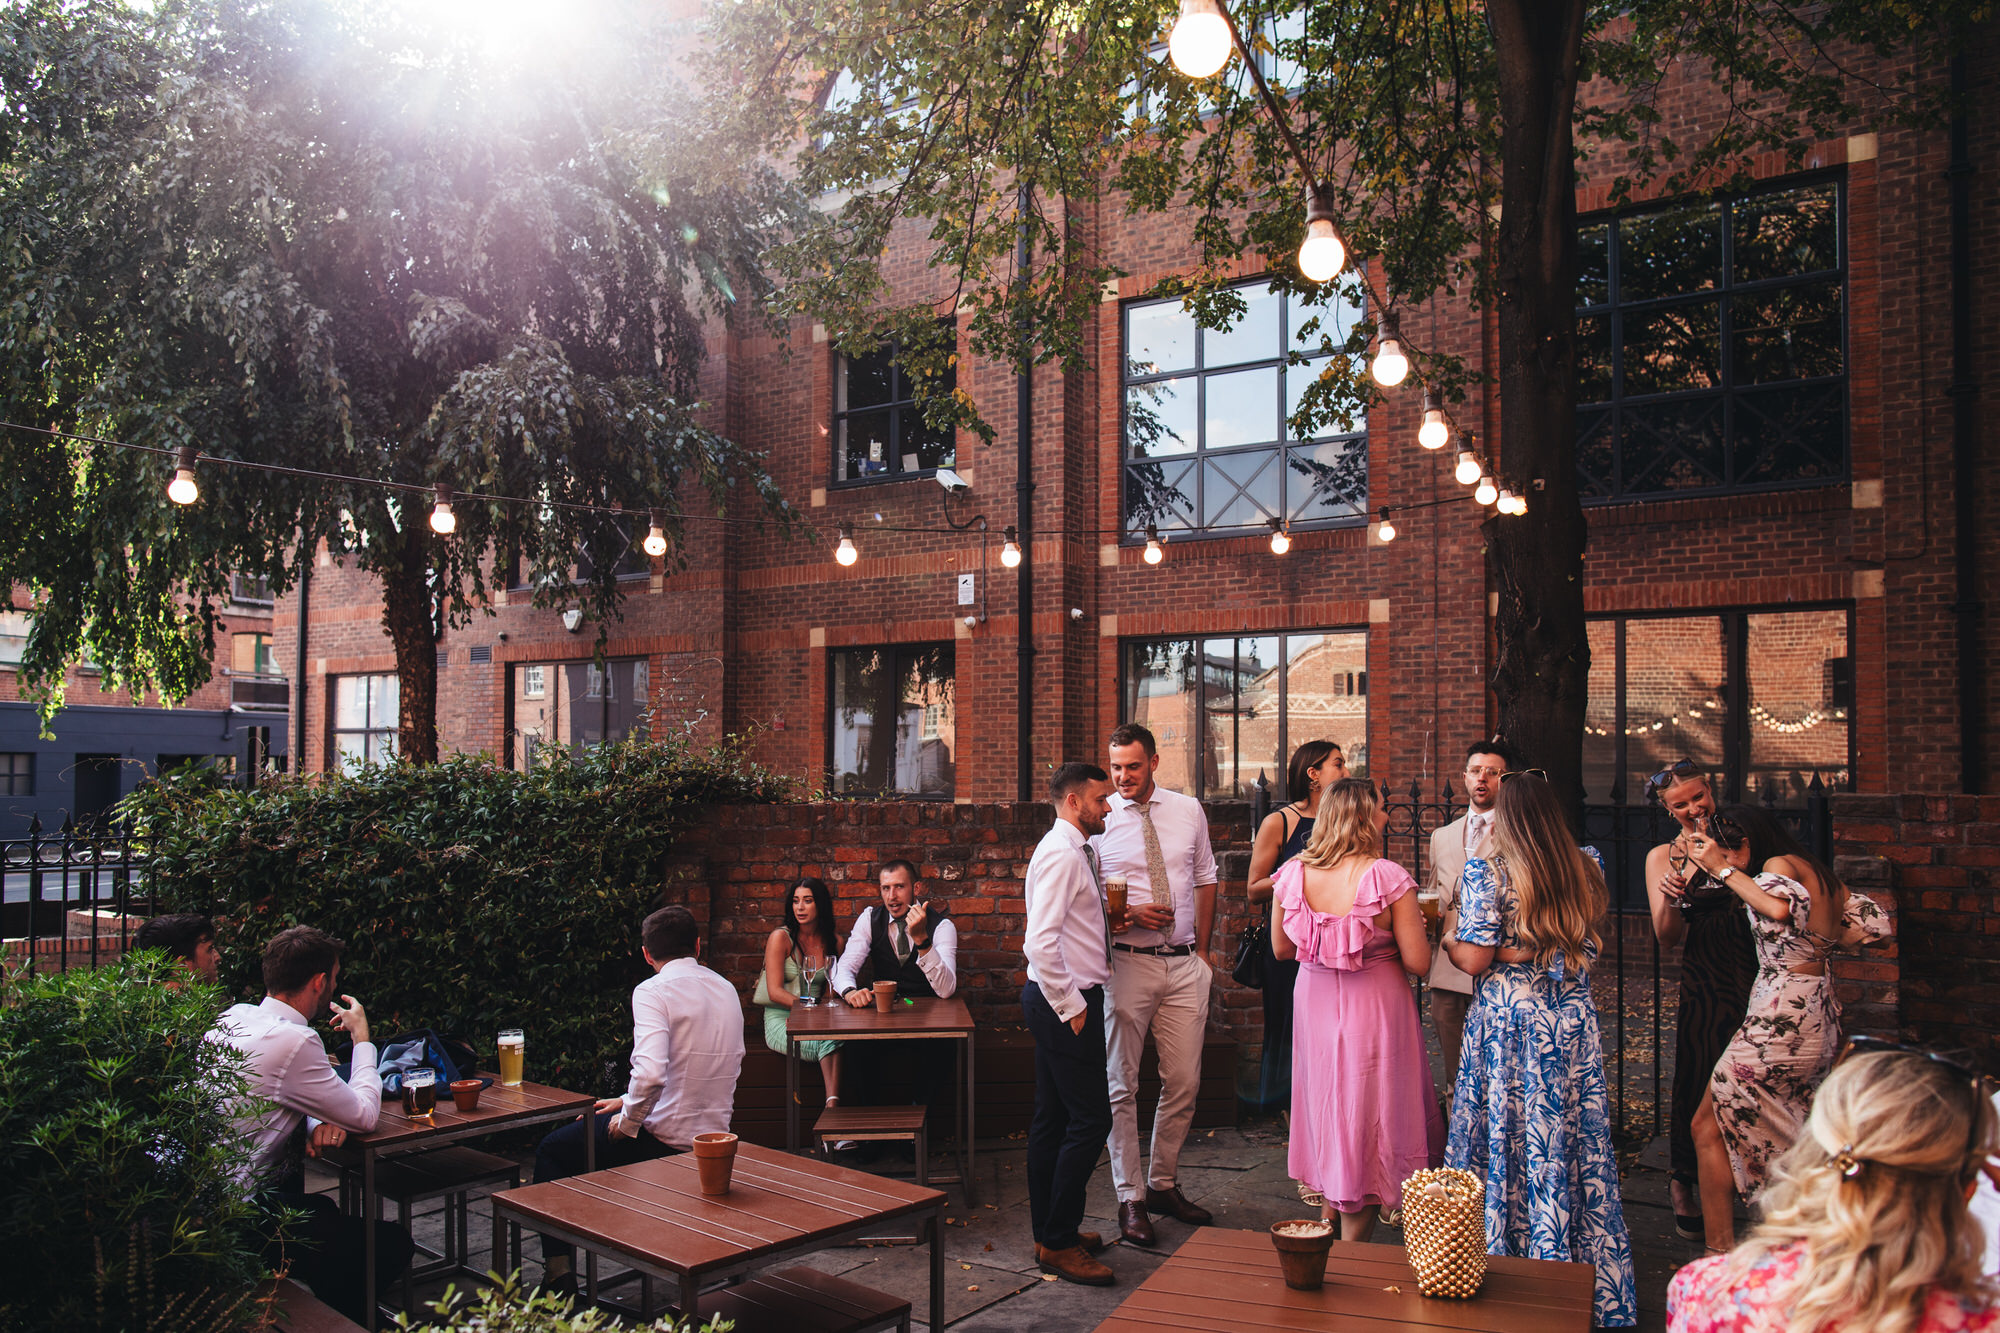 outdoor festoon lights outside shears yard with wedding guests drinking underneath